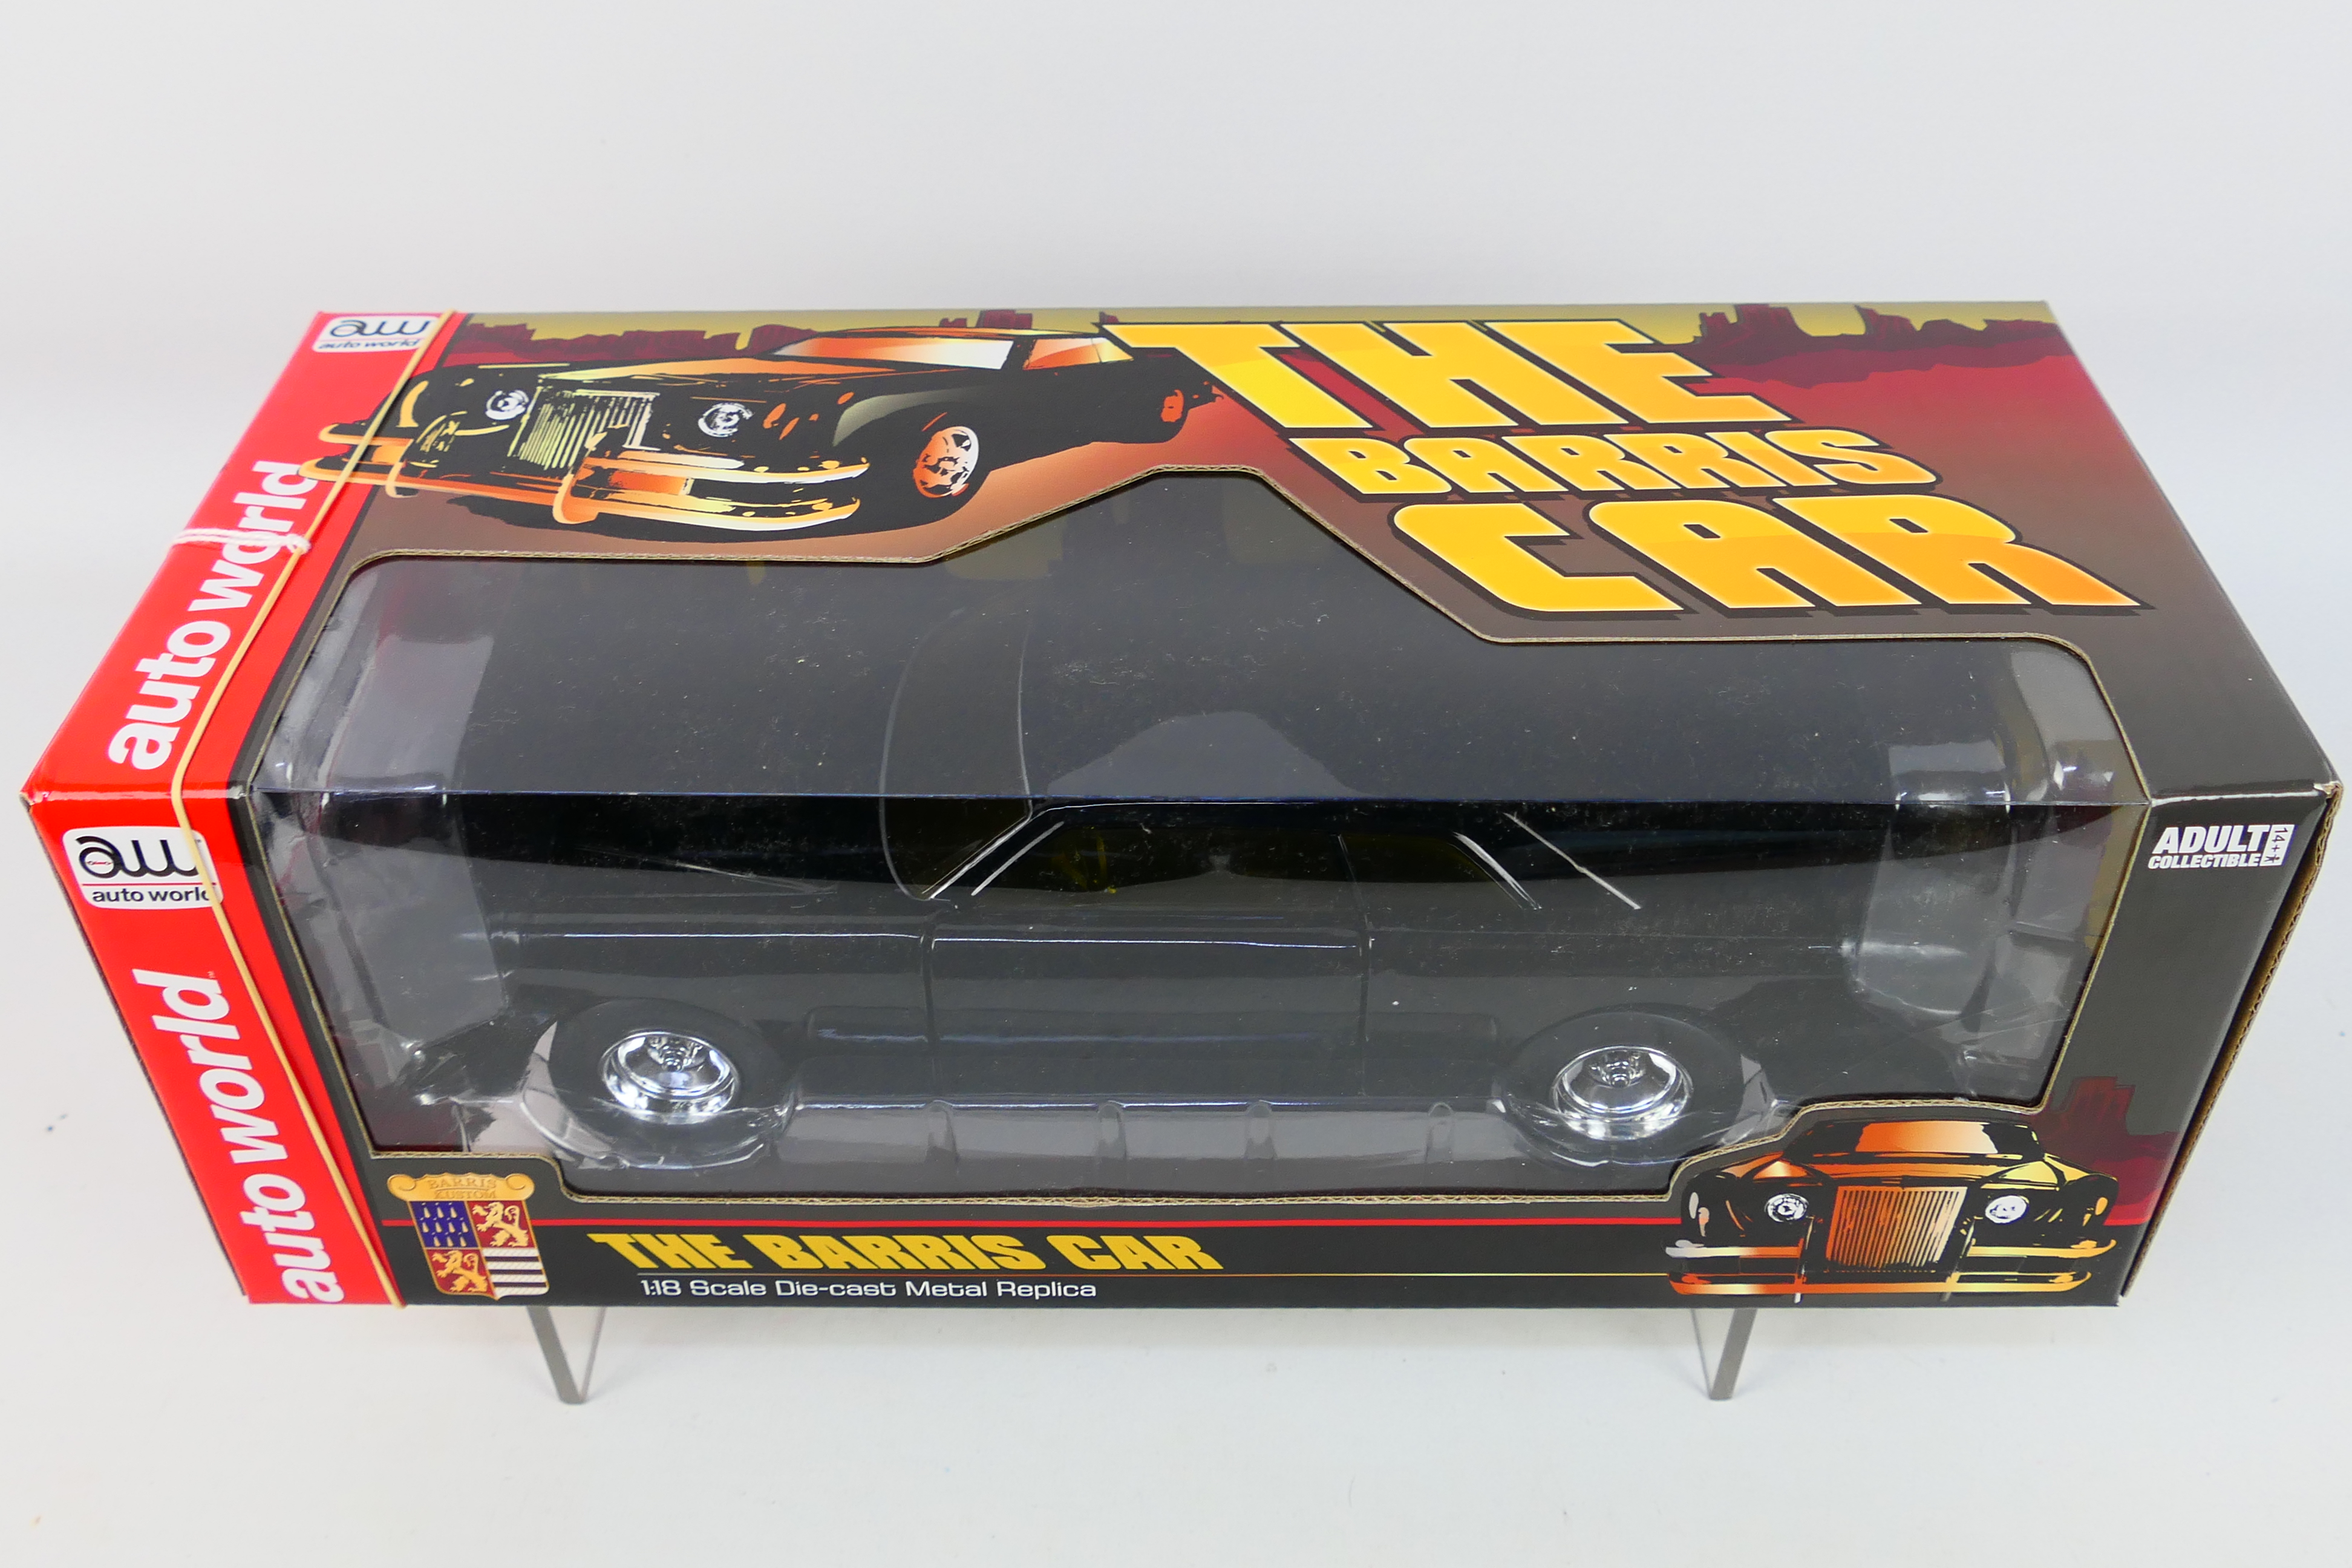 Auto World - A boxed 1:18 scale Auto World #AWSS120 Bariss Kustom Series 'The Bariss Car'. - Image 2 of 2